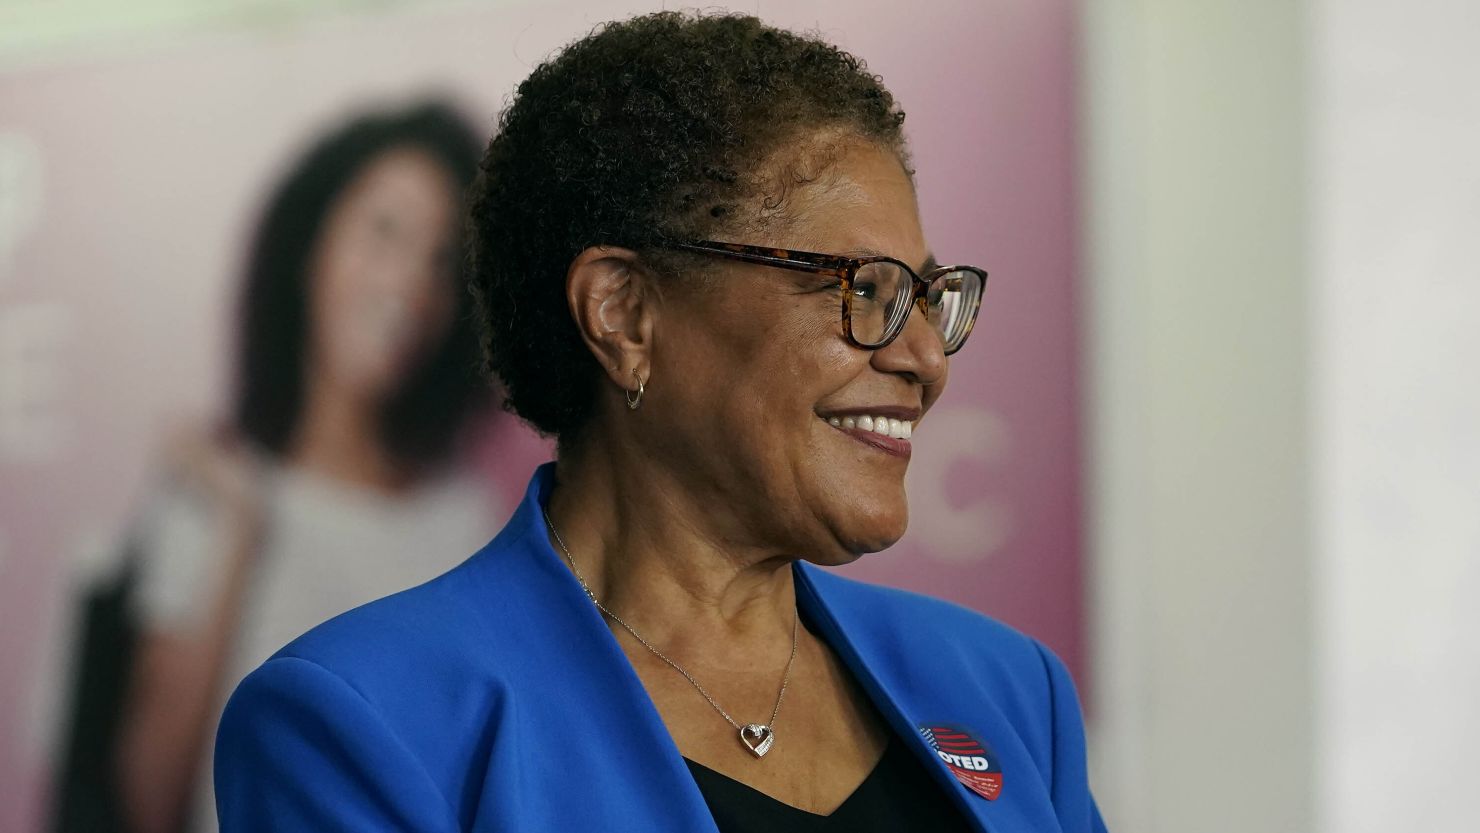 Karen Bass has chance to make history in Los Angeles mayoral race | CNN ...